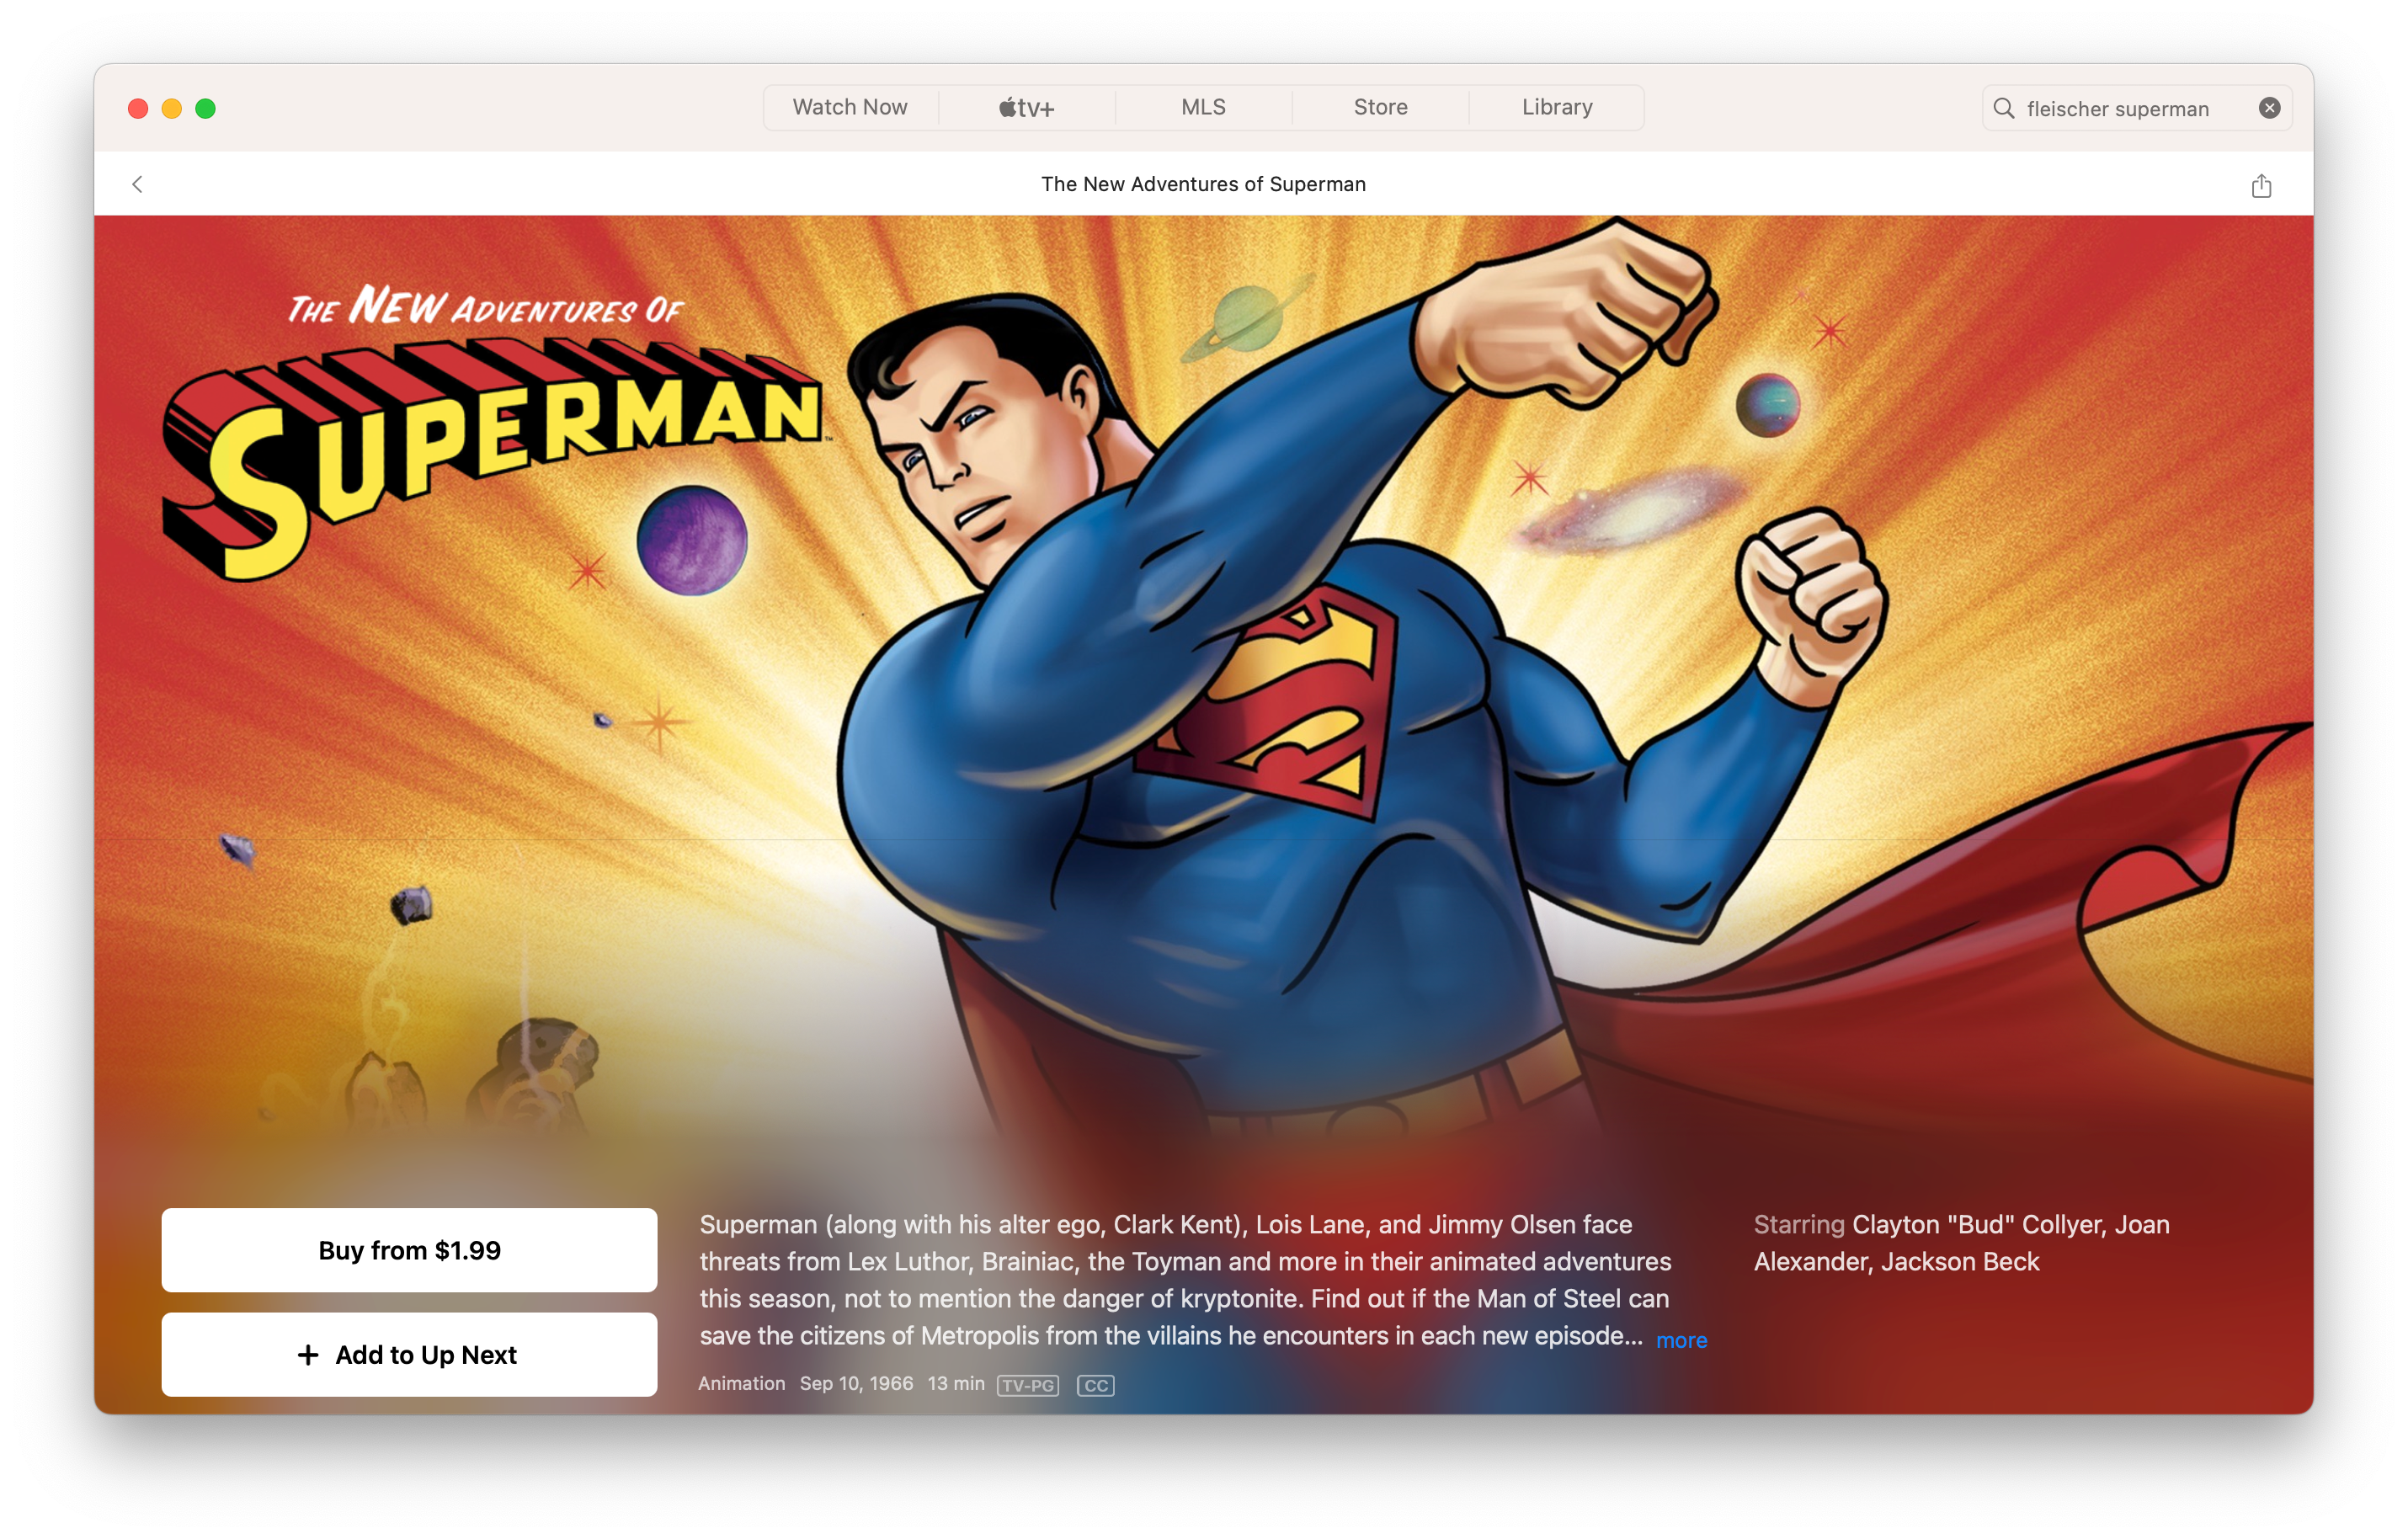 The New Adventures of Superman iTunes purchase screen with Superman throwing a punch